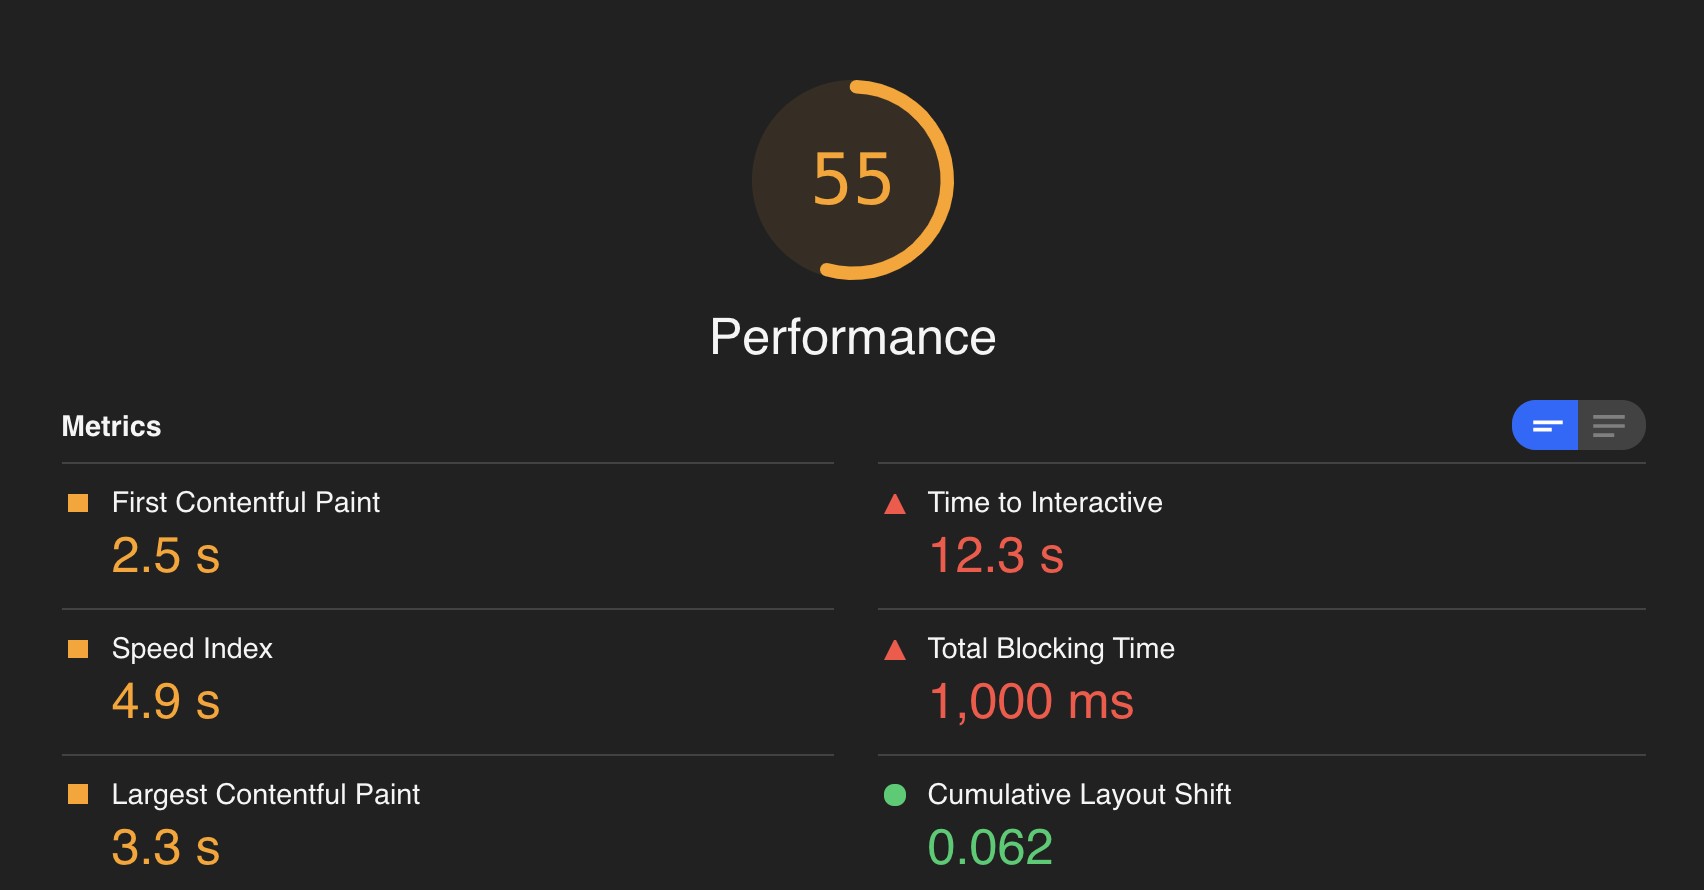 Lighthouse web page performance metrics including First Contentful Paint